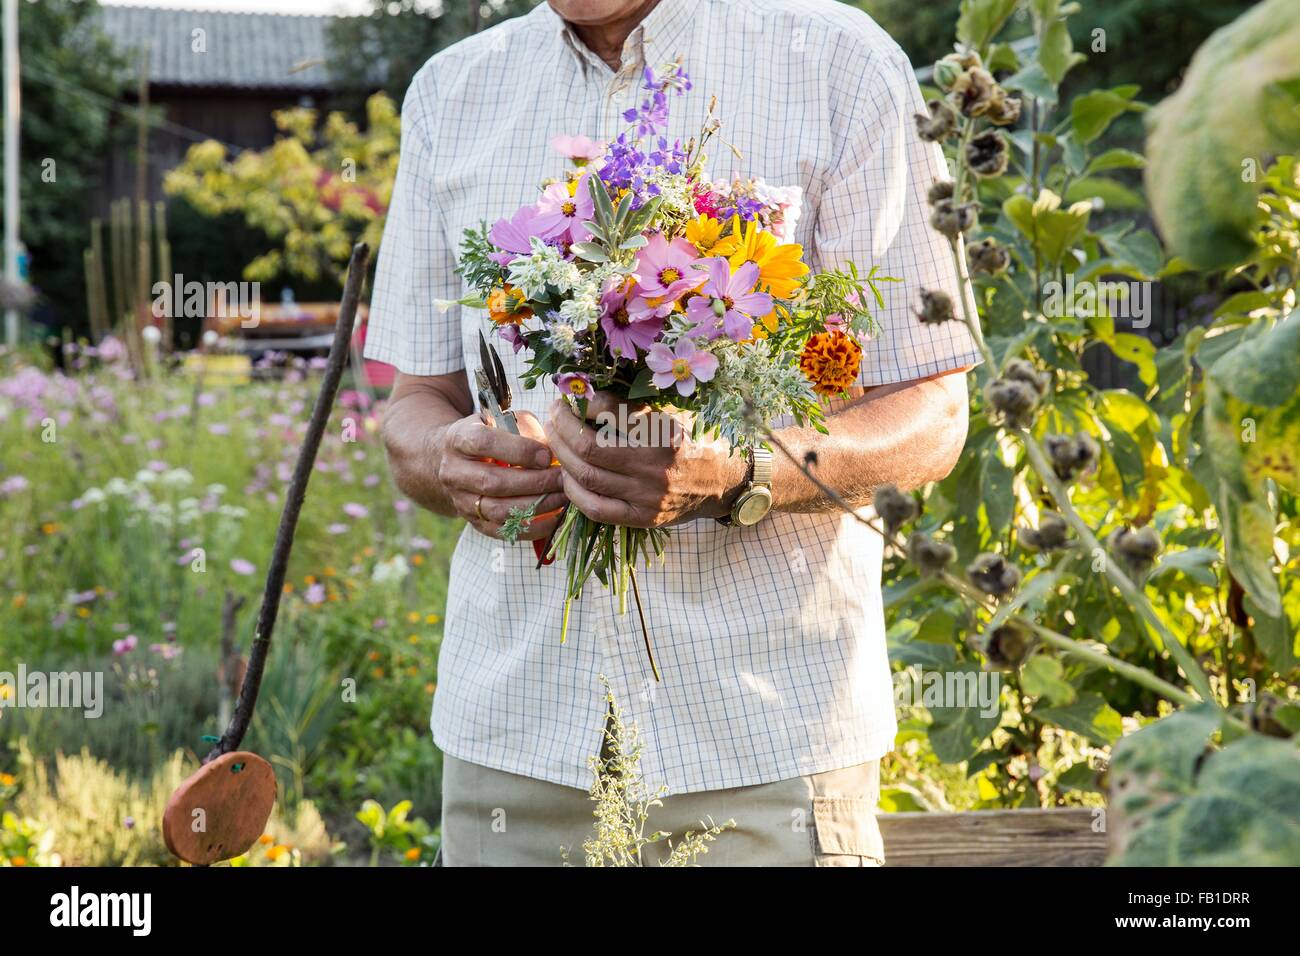 Senior man in garden, holding bunch of fresh cut flowers, mid section Stock Photo